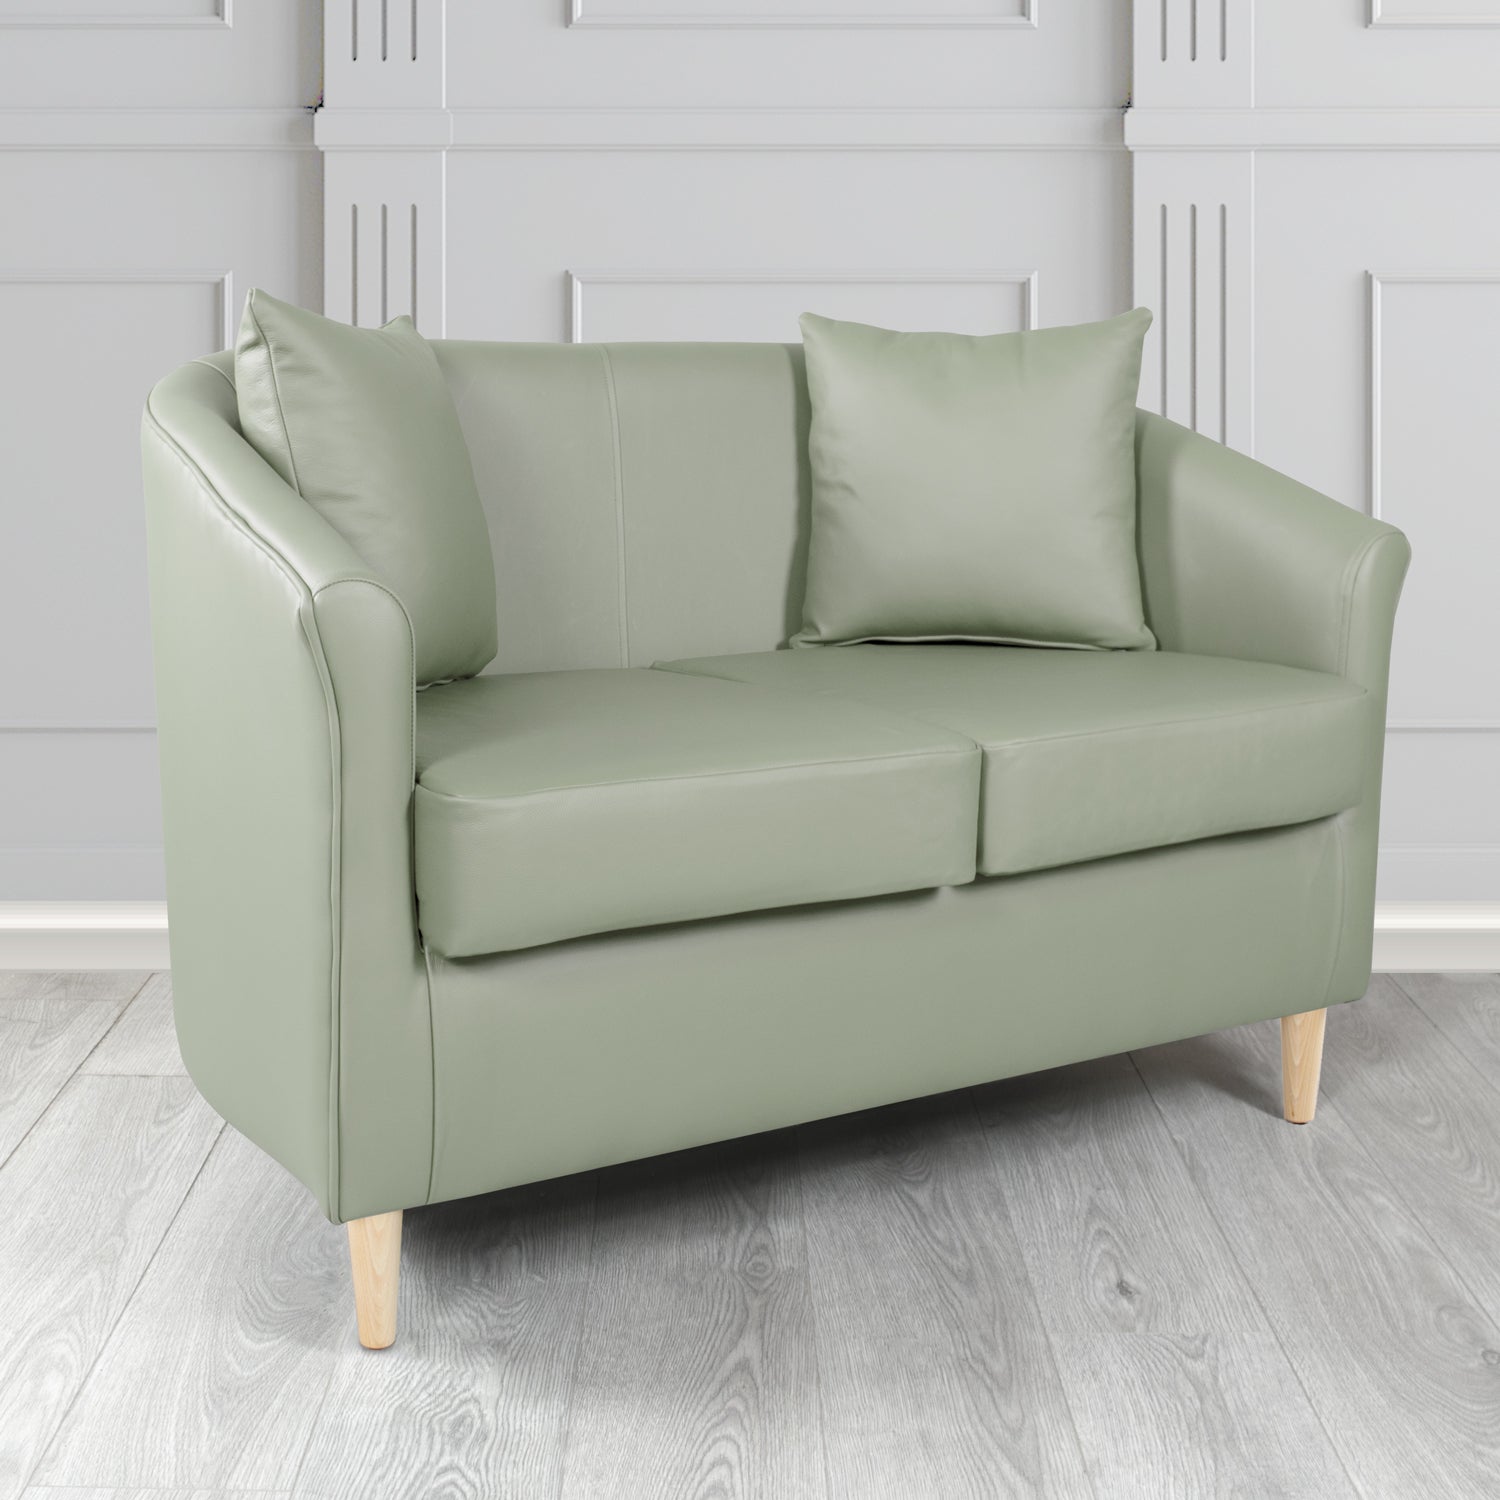 St Tropez Shelly Moon Mist Crib 5 Genuine Leather 2 Seater Tub Sofa with Scatter Cushions - The Tub Chair Shop